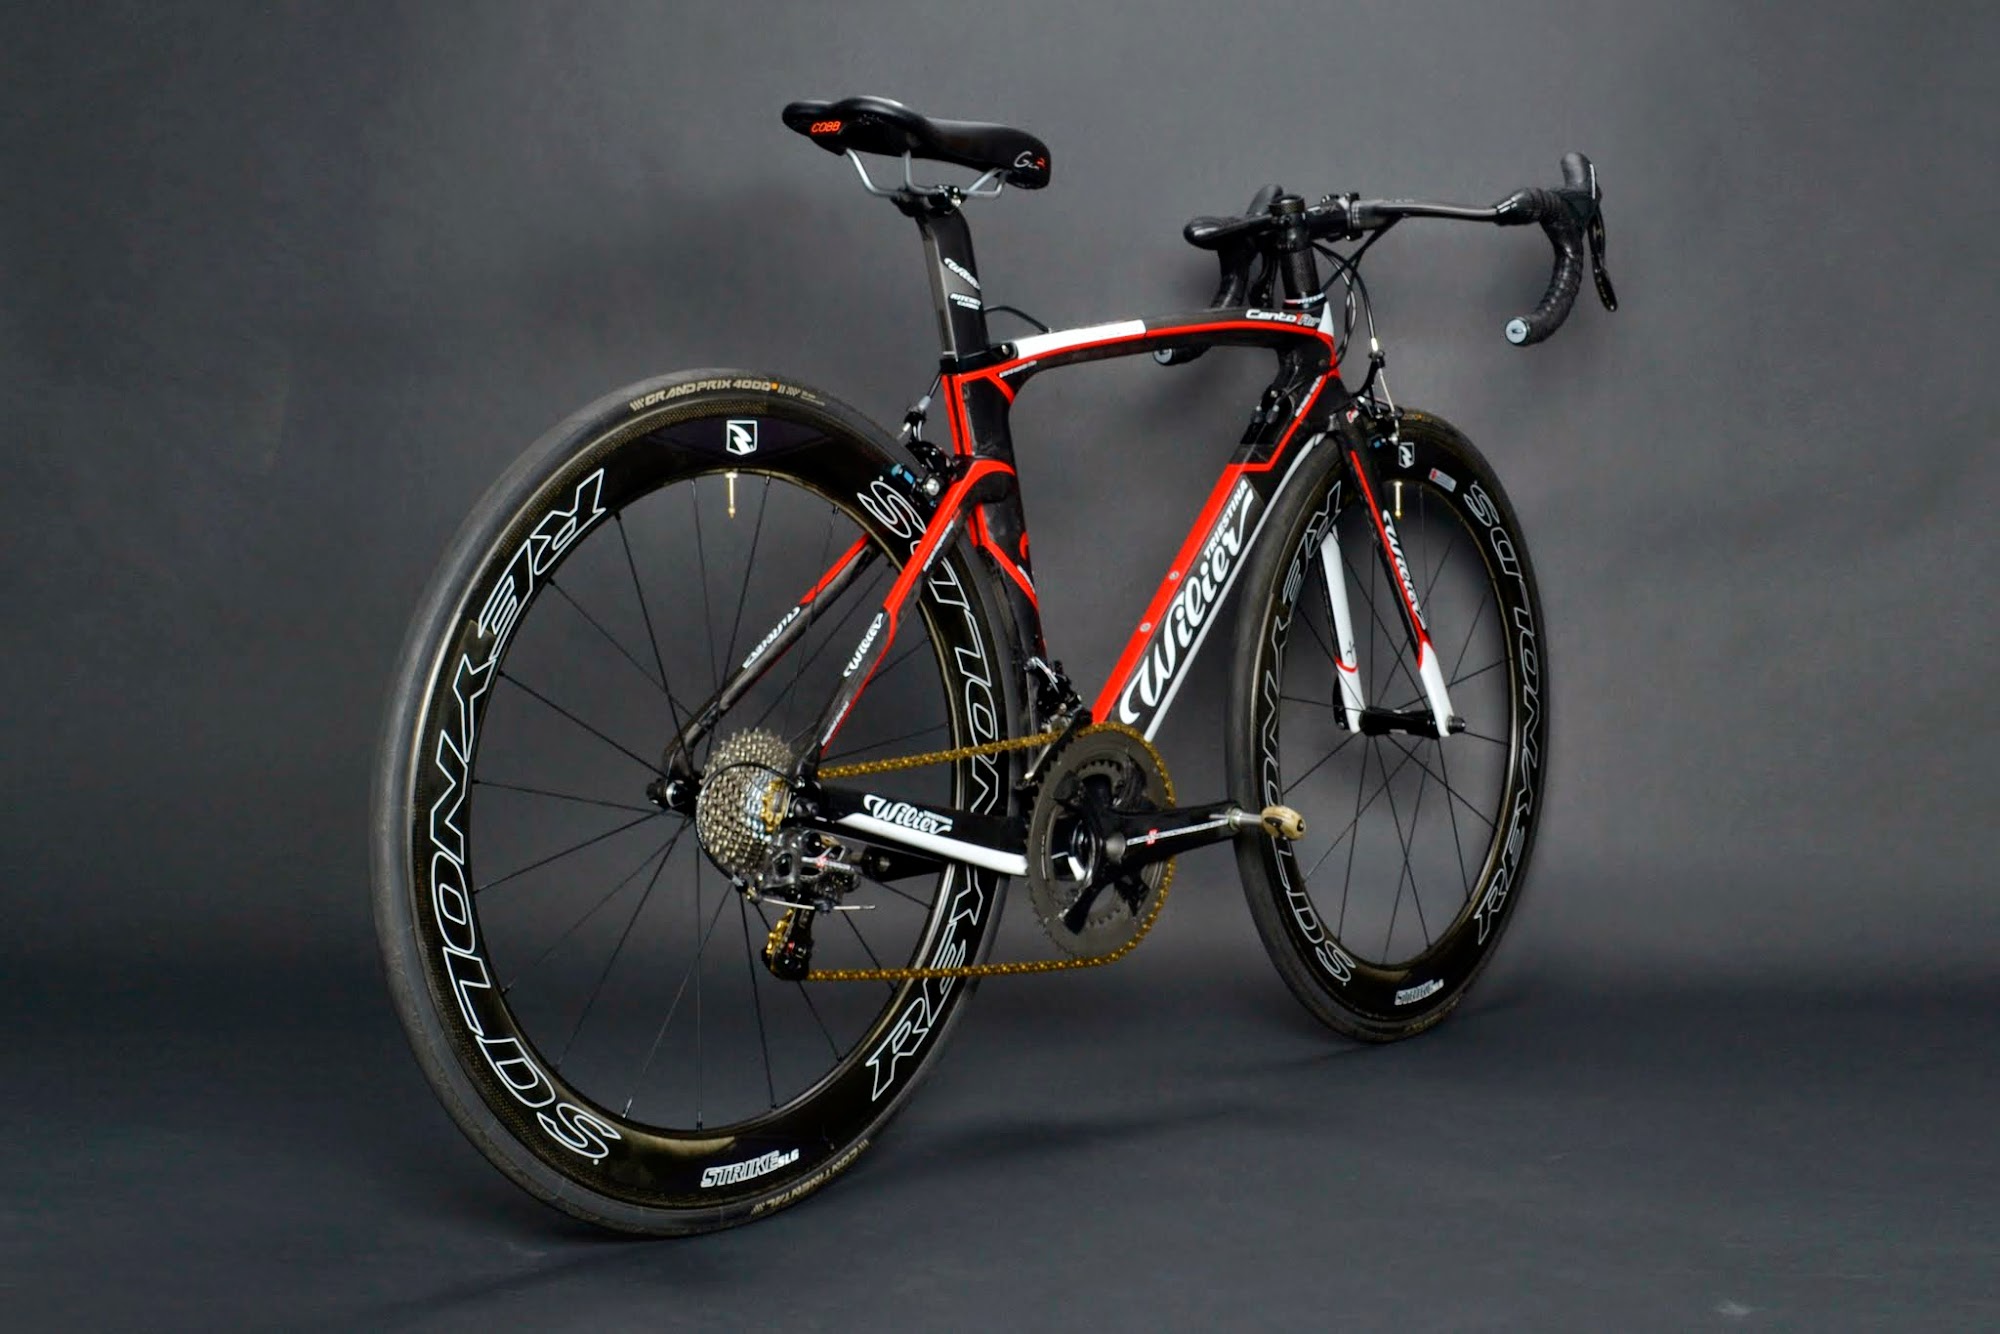 www.twohubs.com: Wilier Triestina Cento1 Air Campagnolo Super Record